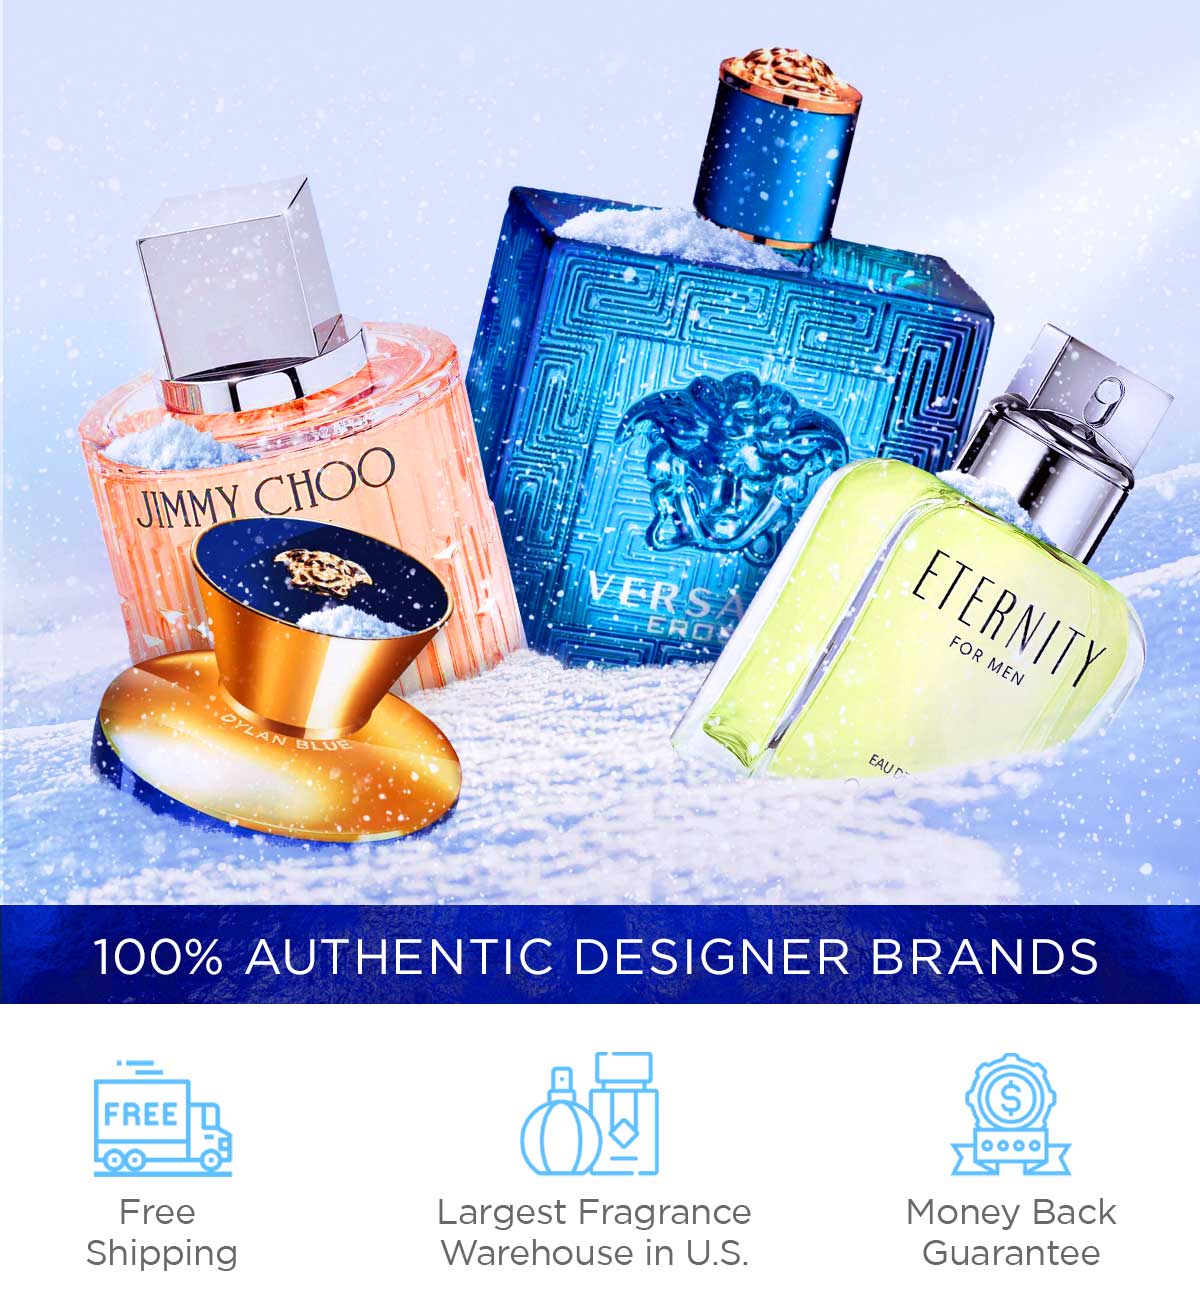 Popular fragrances are displayed in the snow to advertise winter savings